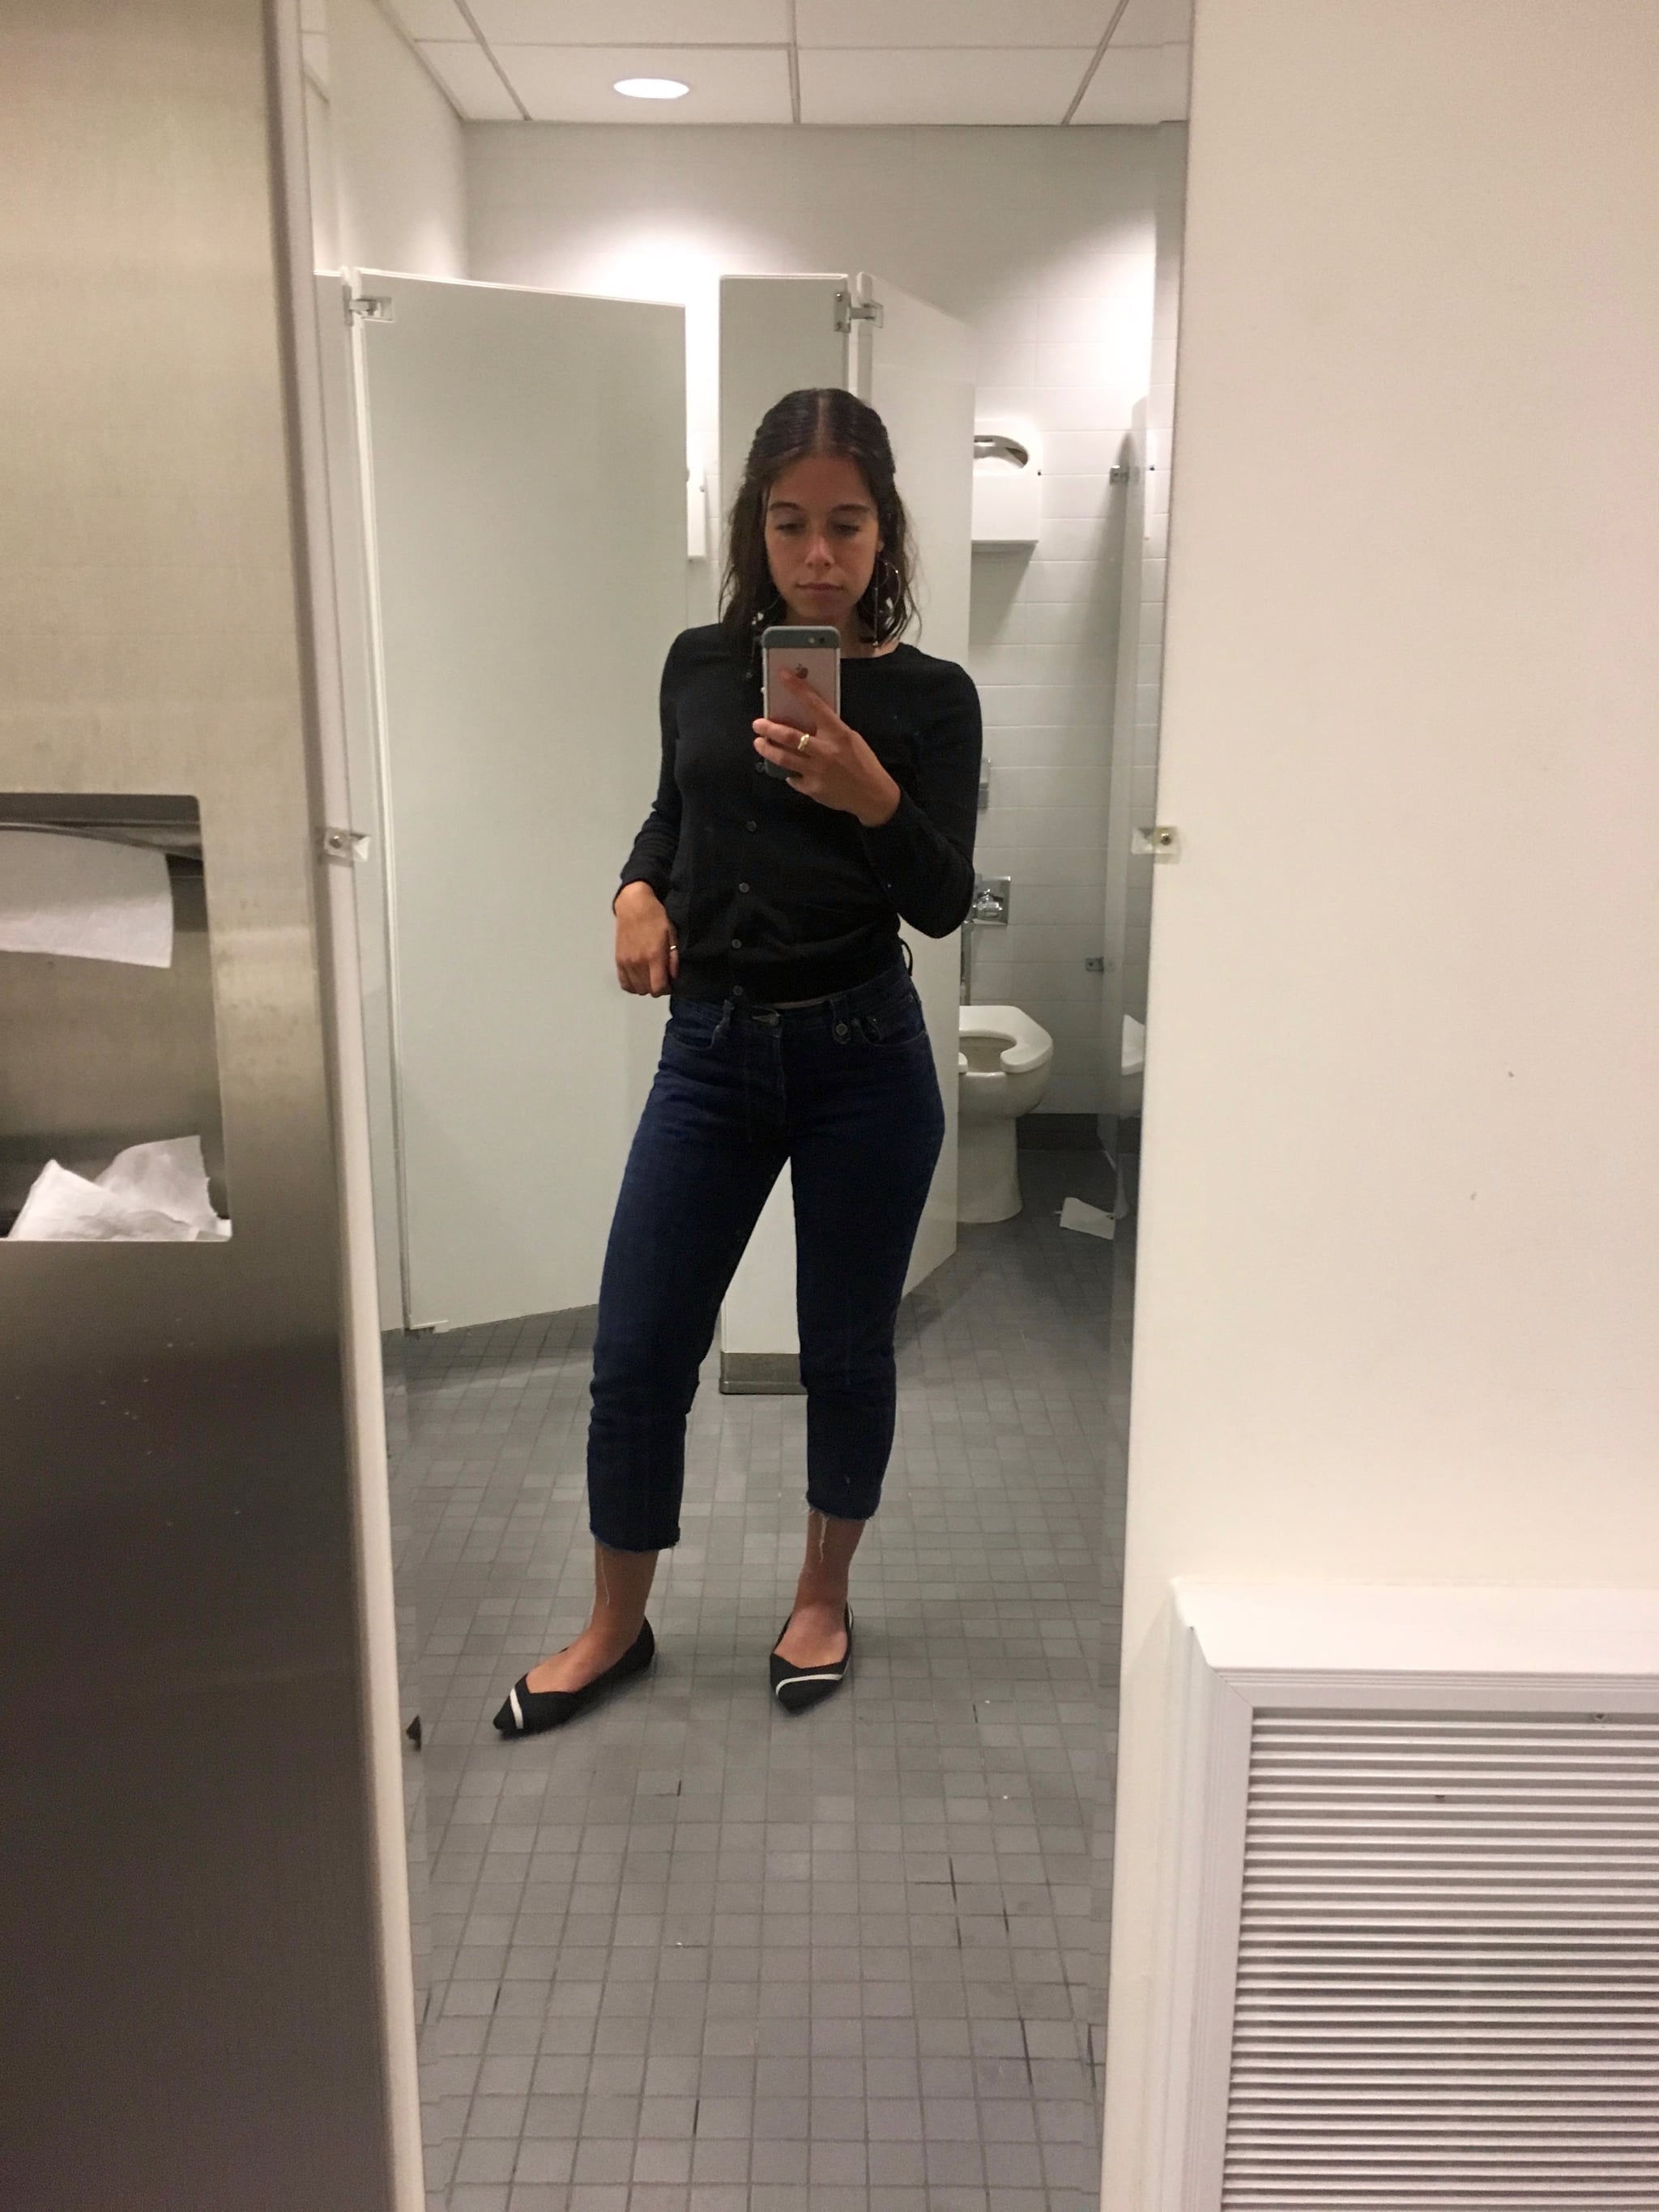 Fashion, Shopping & Style, I Channelled Kendall Jenner — and Went Braless  at Work